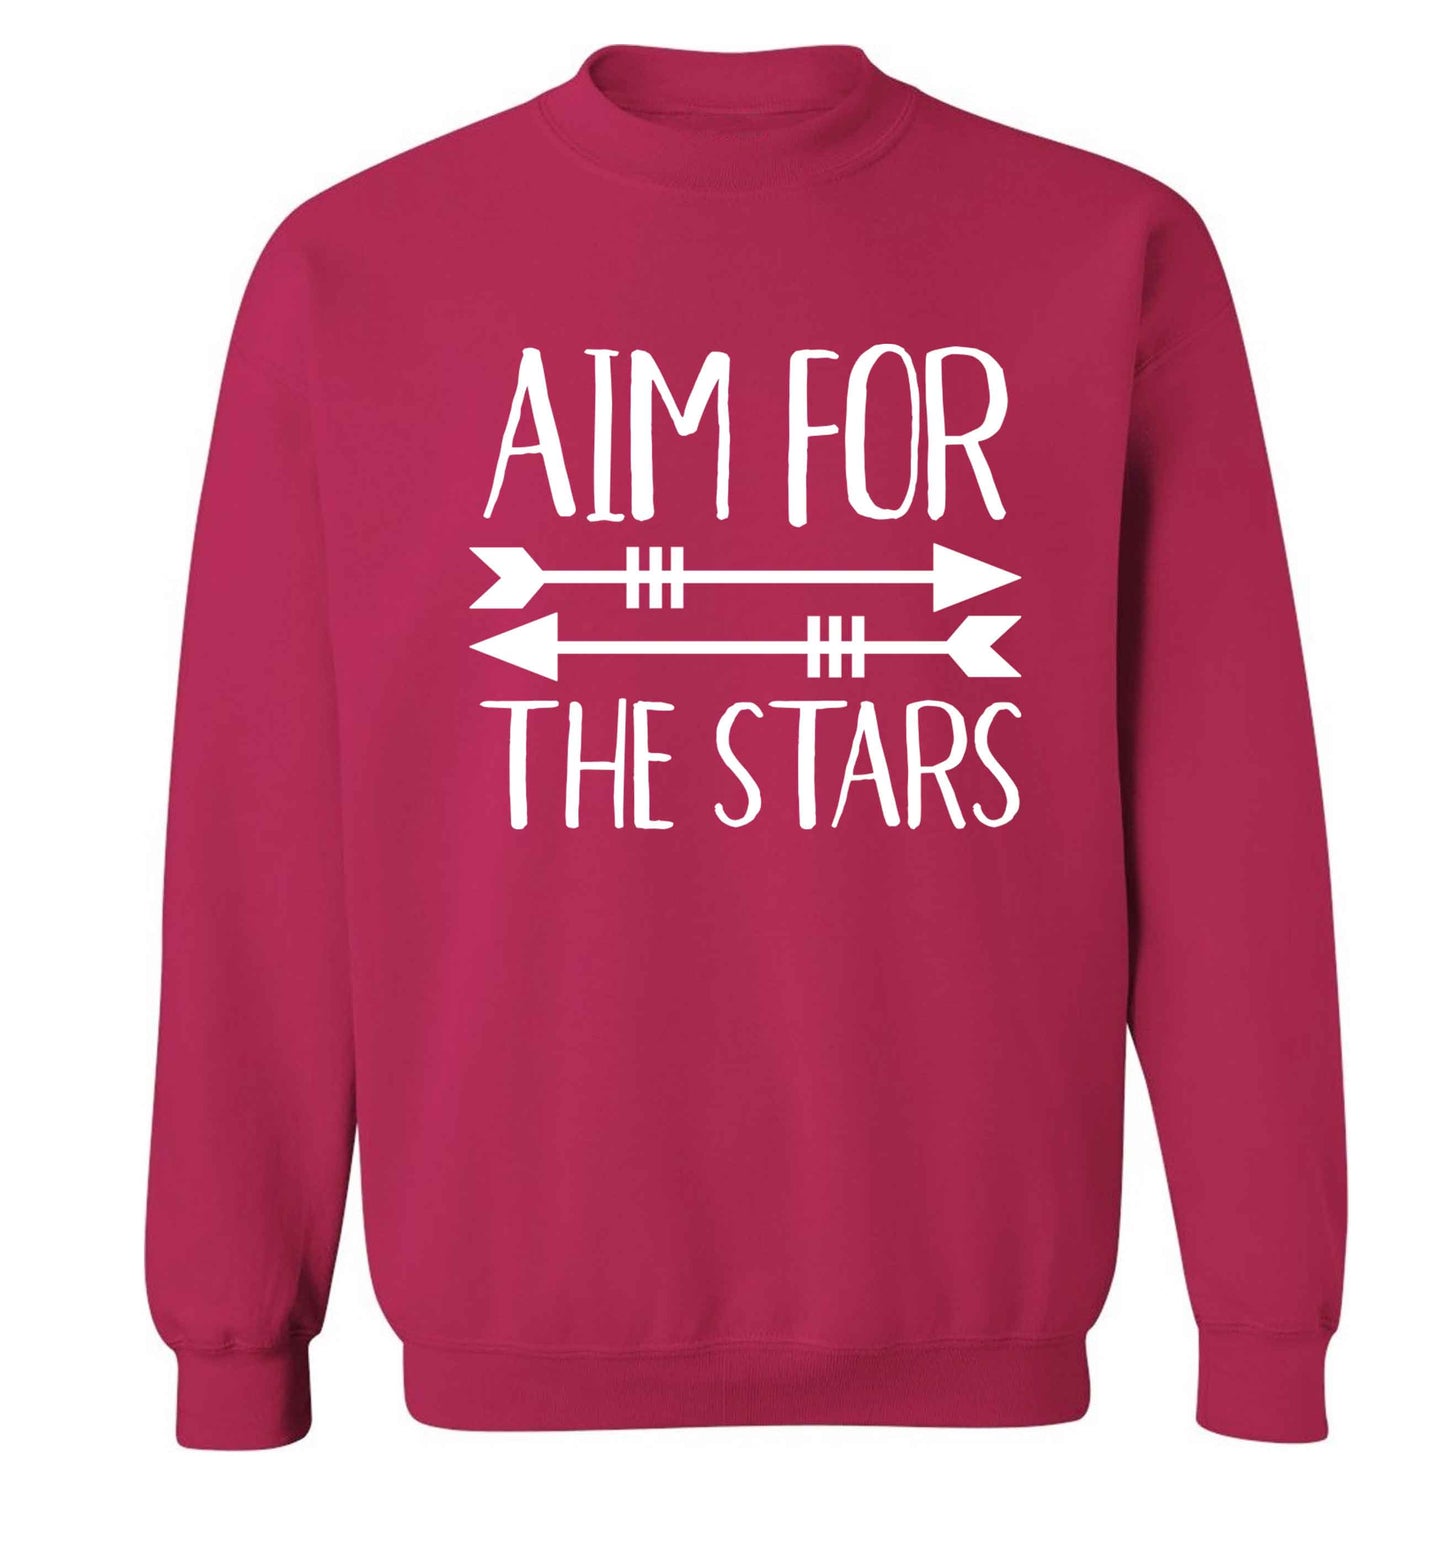 Aim for the stars Adult's unisex pink Sweater 2XL